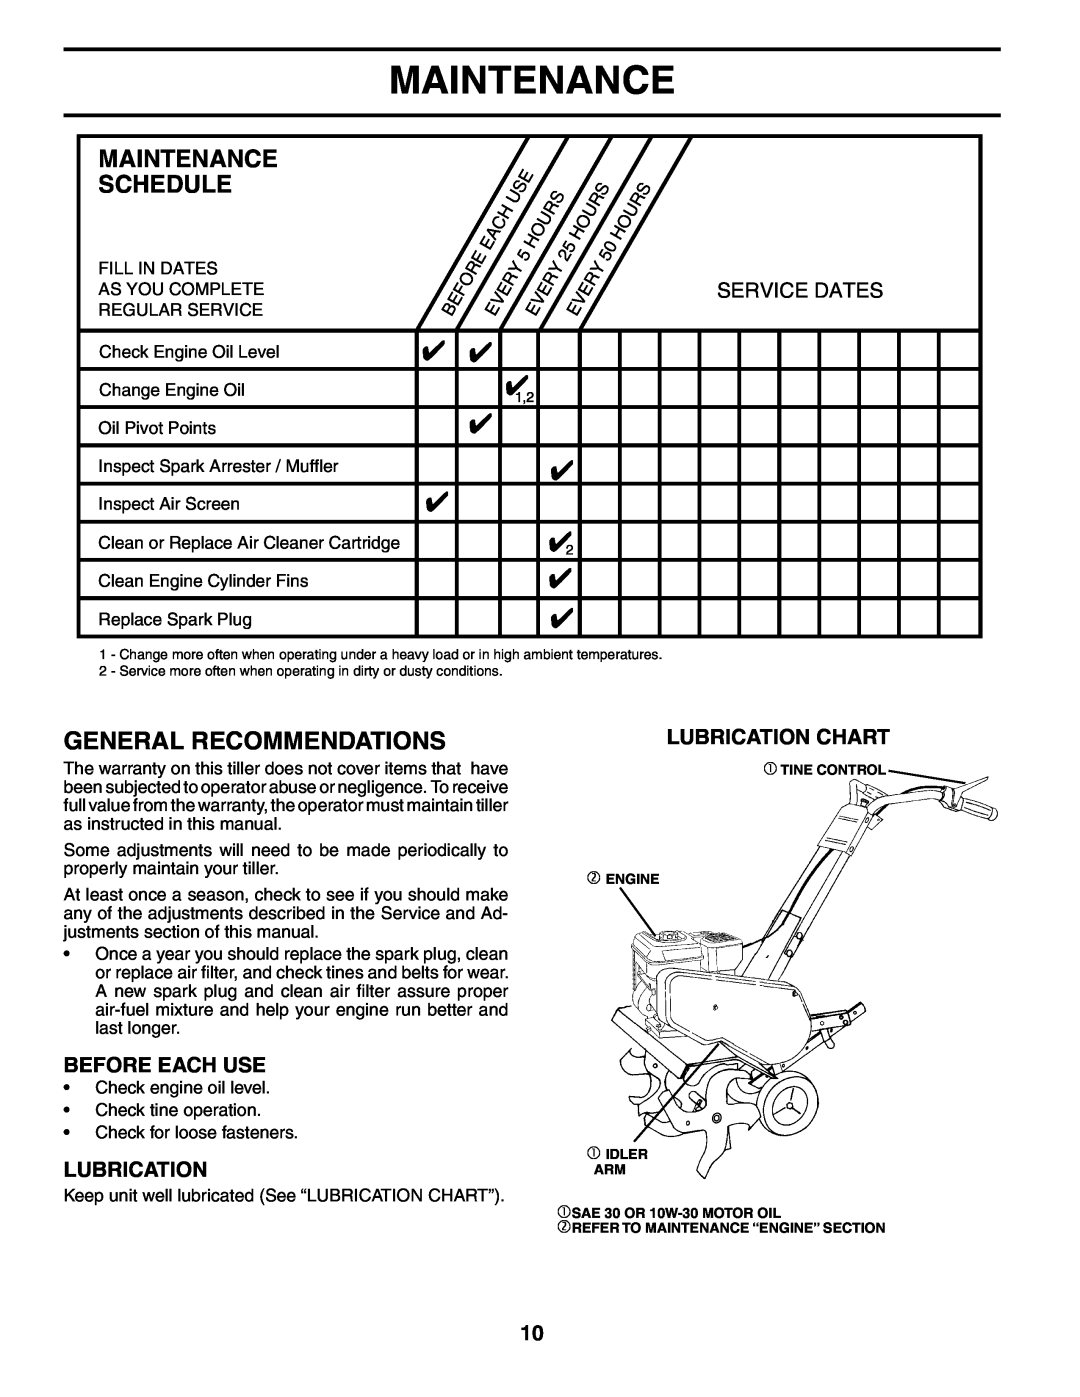 Poulan AGF550A General Recommendations, Before Each Use, Lubrication Chart, Maintenance Schedule, Service Dates 